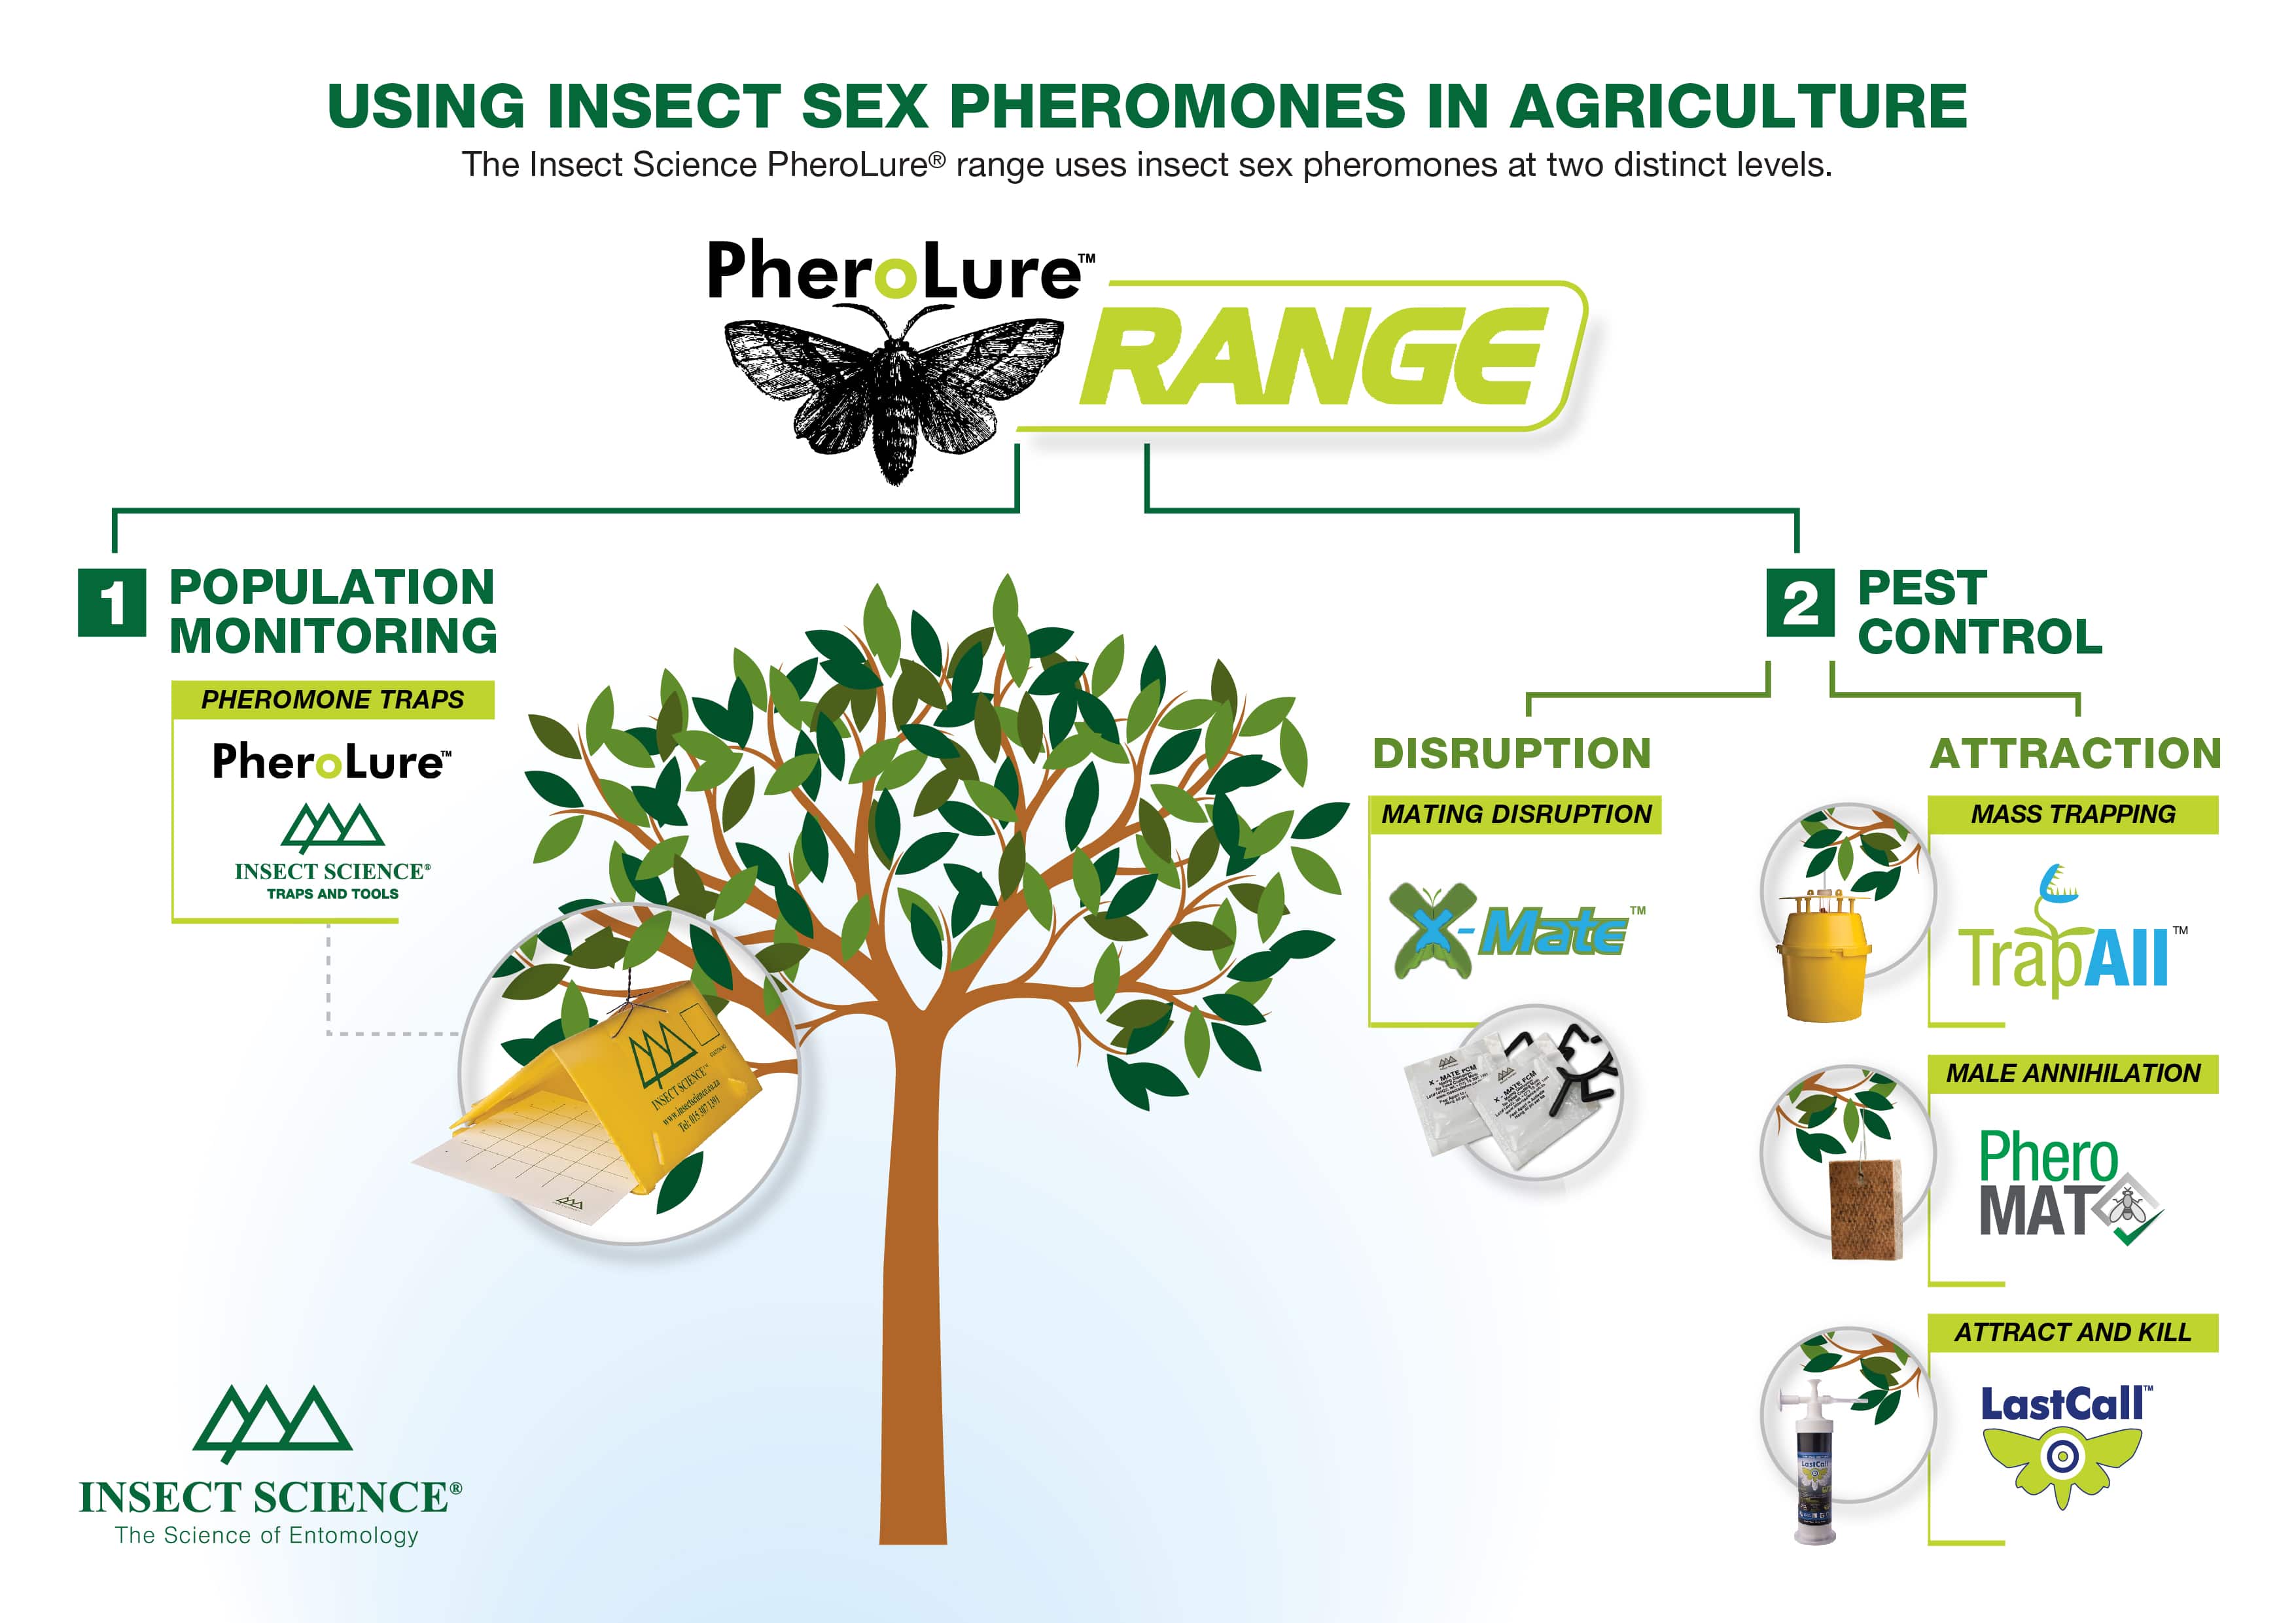 https://insectscience.co.za/wp-content/uploads/2021/06/Using-insect-pest-sex-pheromones.jpg